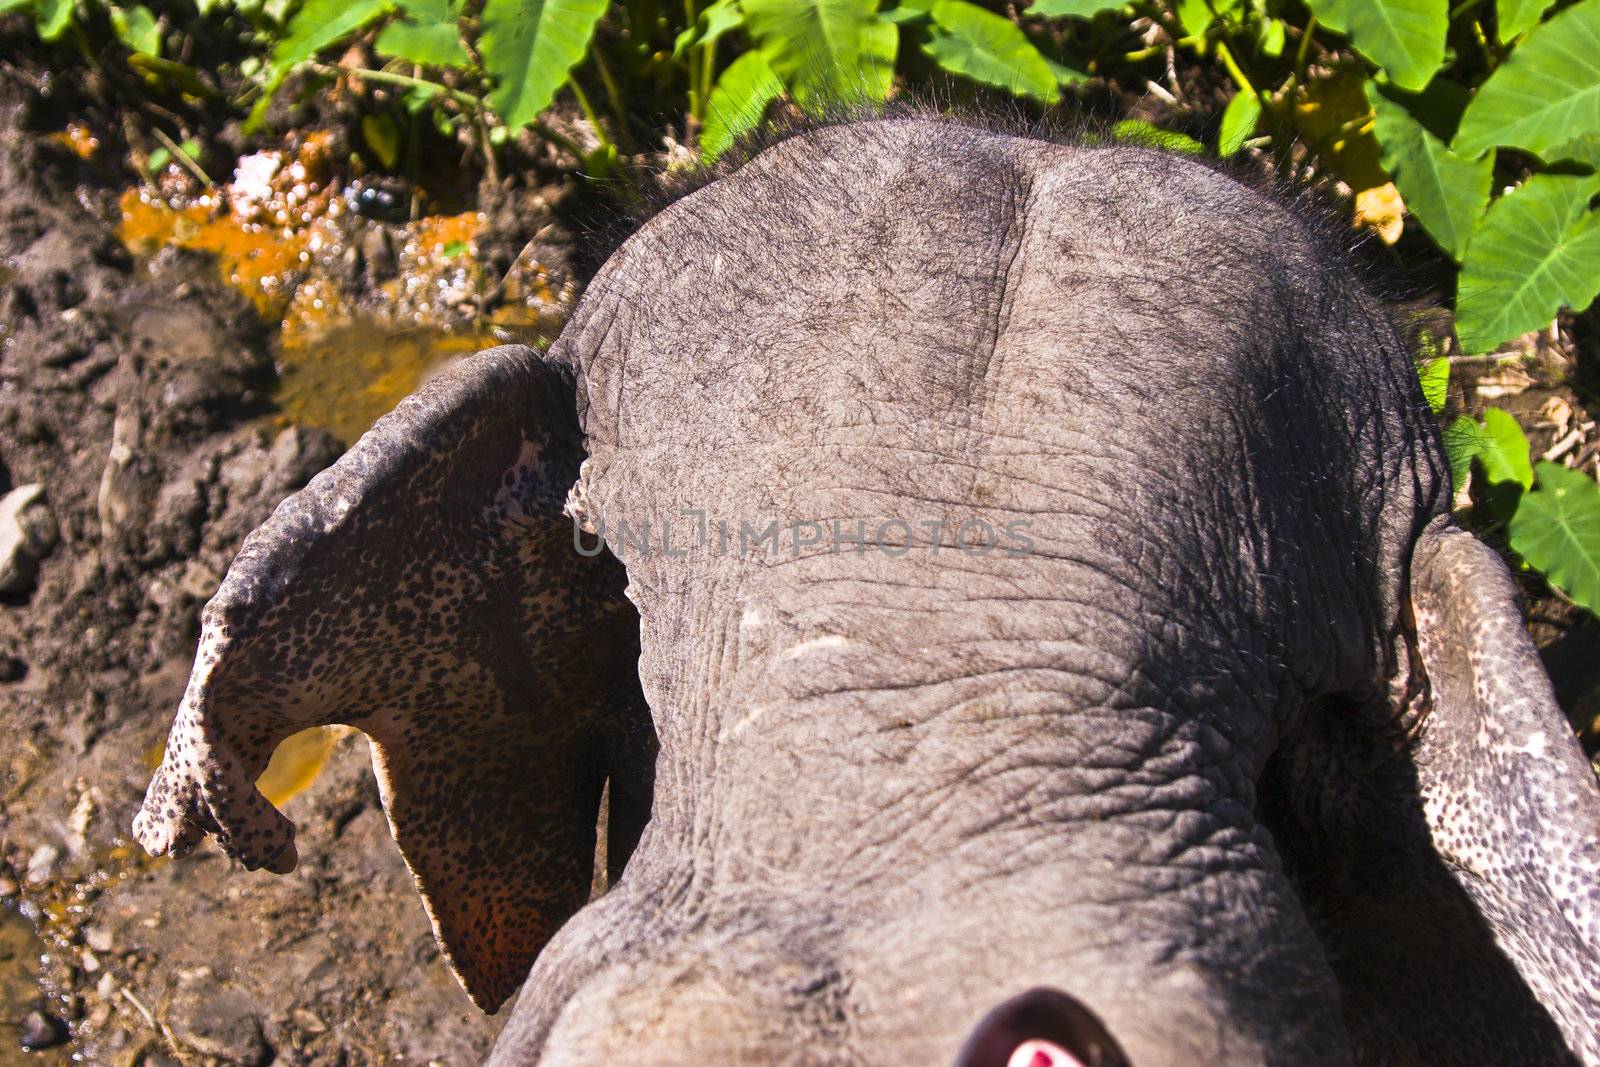 Elephant head with part of a foot with painted nails indicating that the subject is riding an elephant